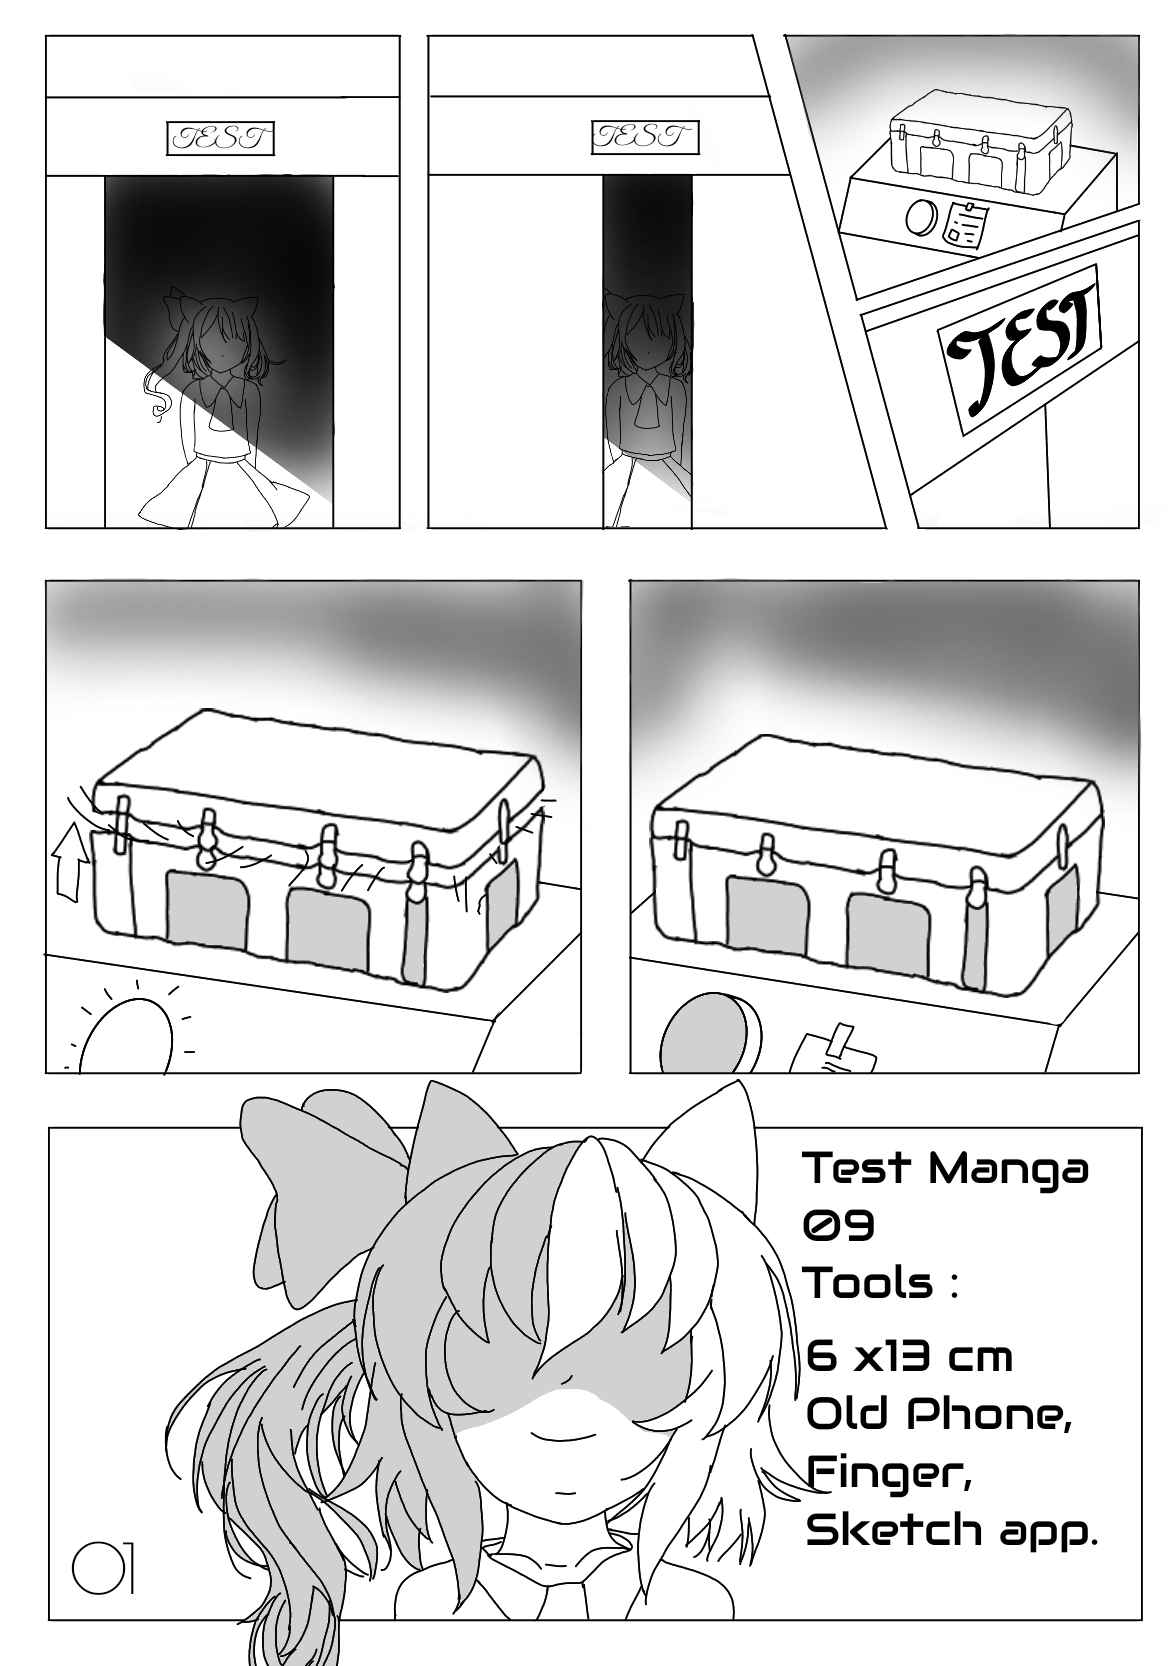 Official Test Manga Vol. 9 Ch. 99 Phone Upload Test